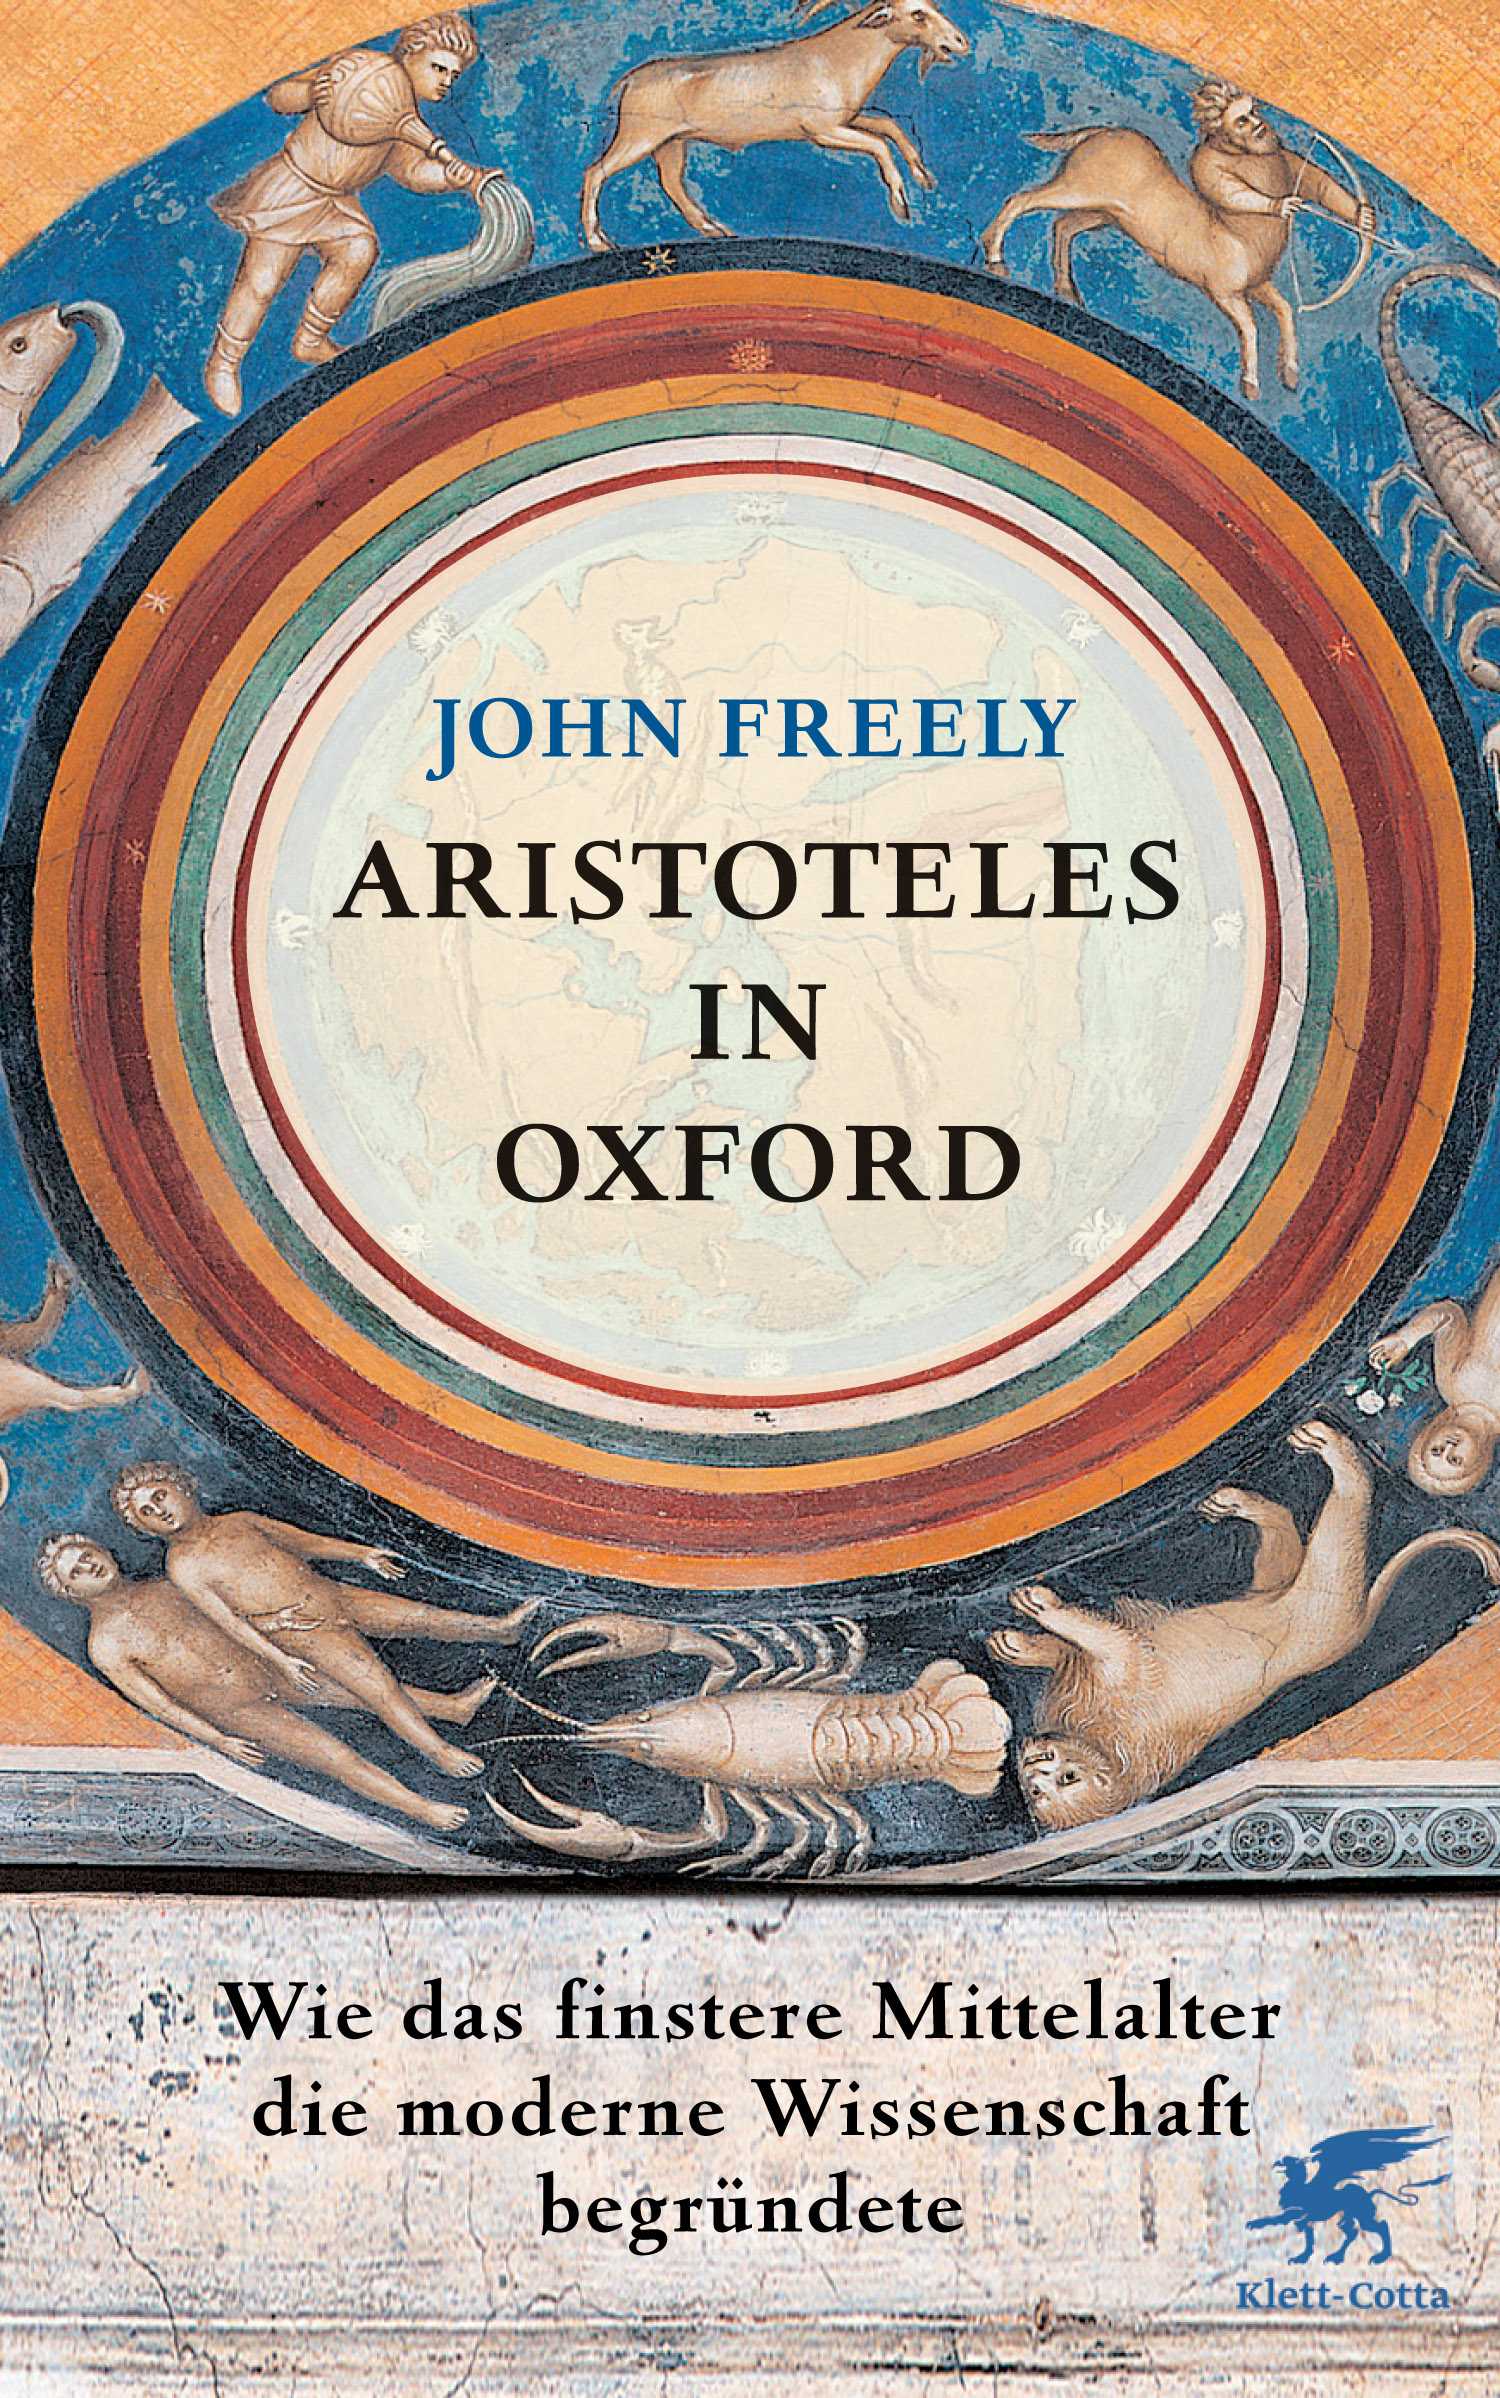 Freely Aristoteles in Oxford